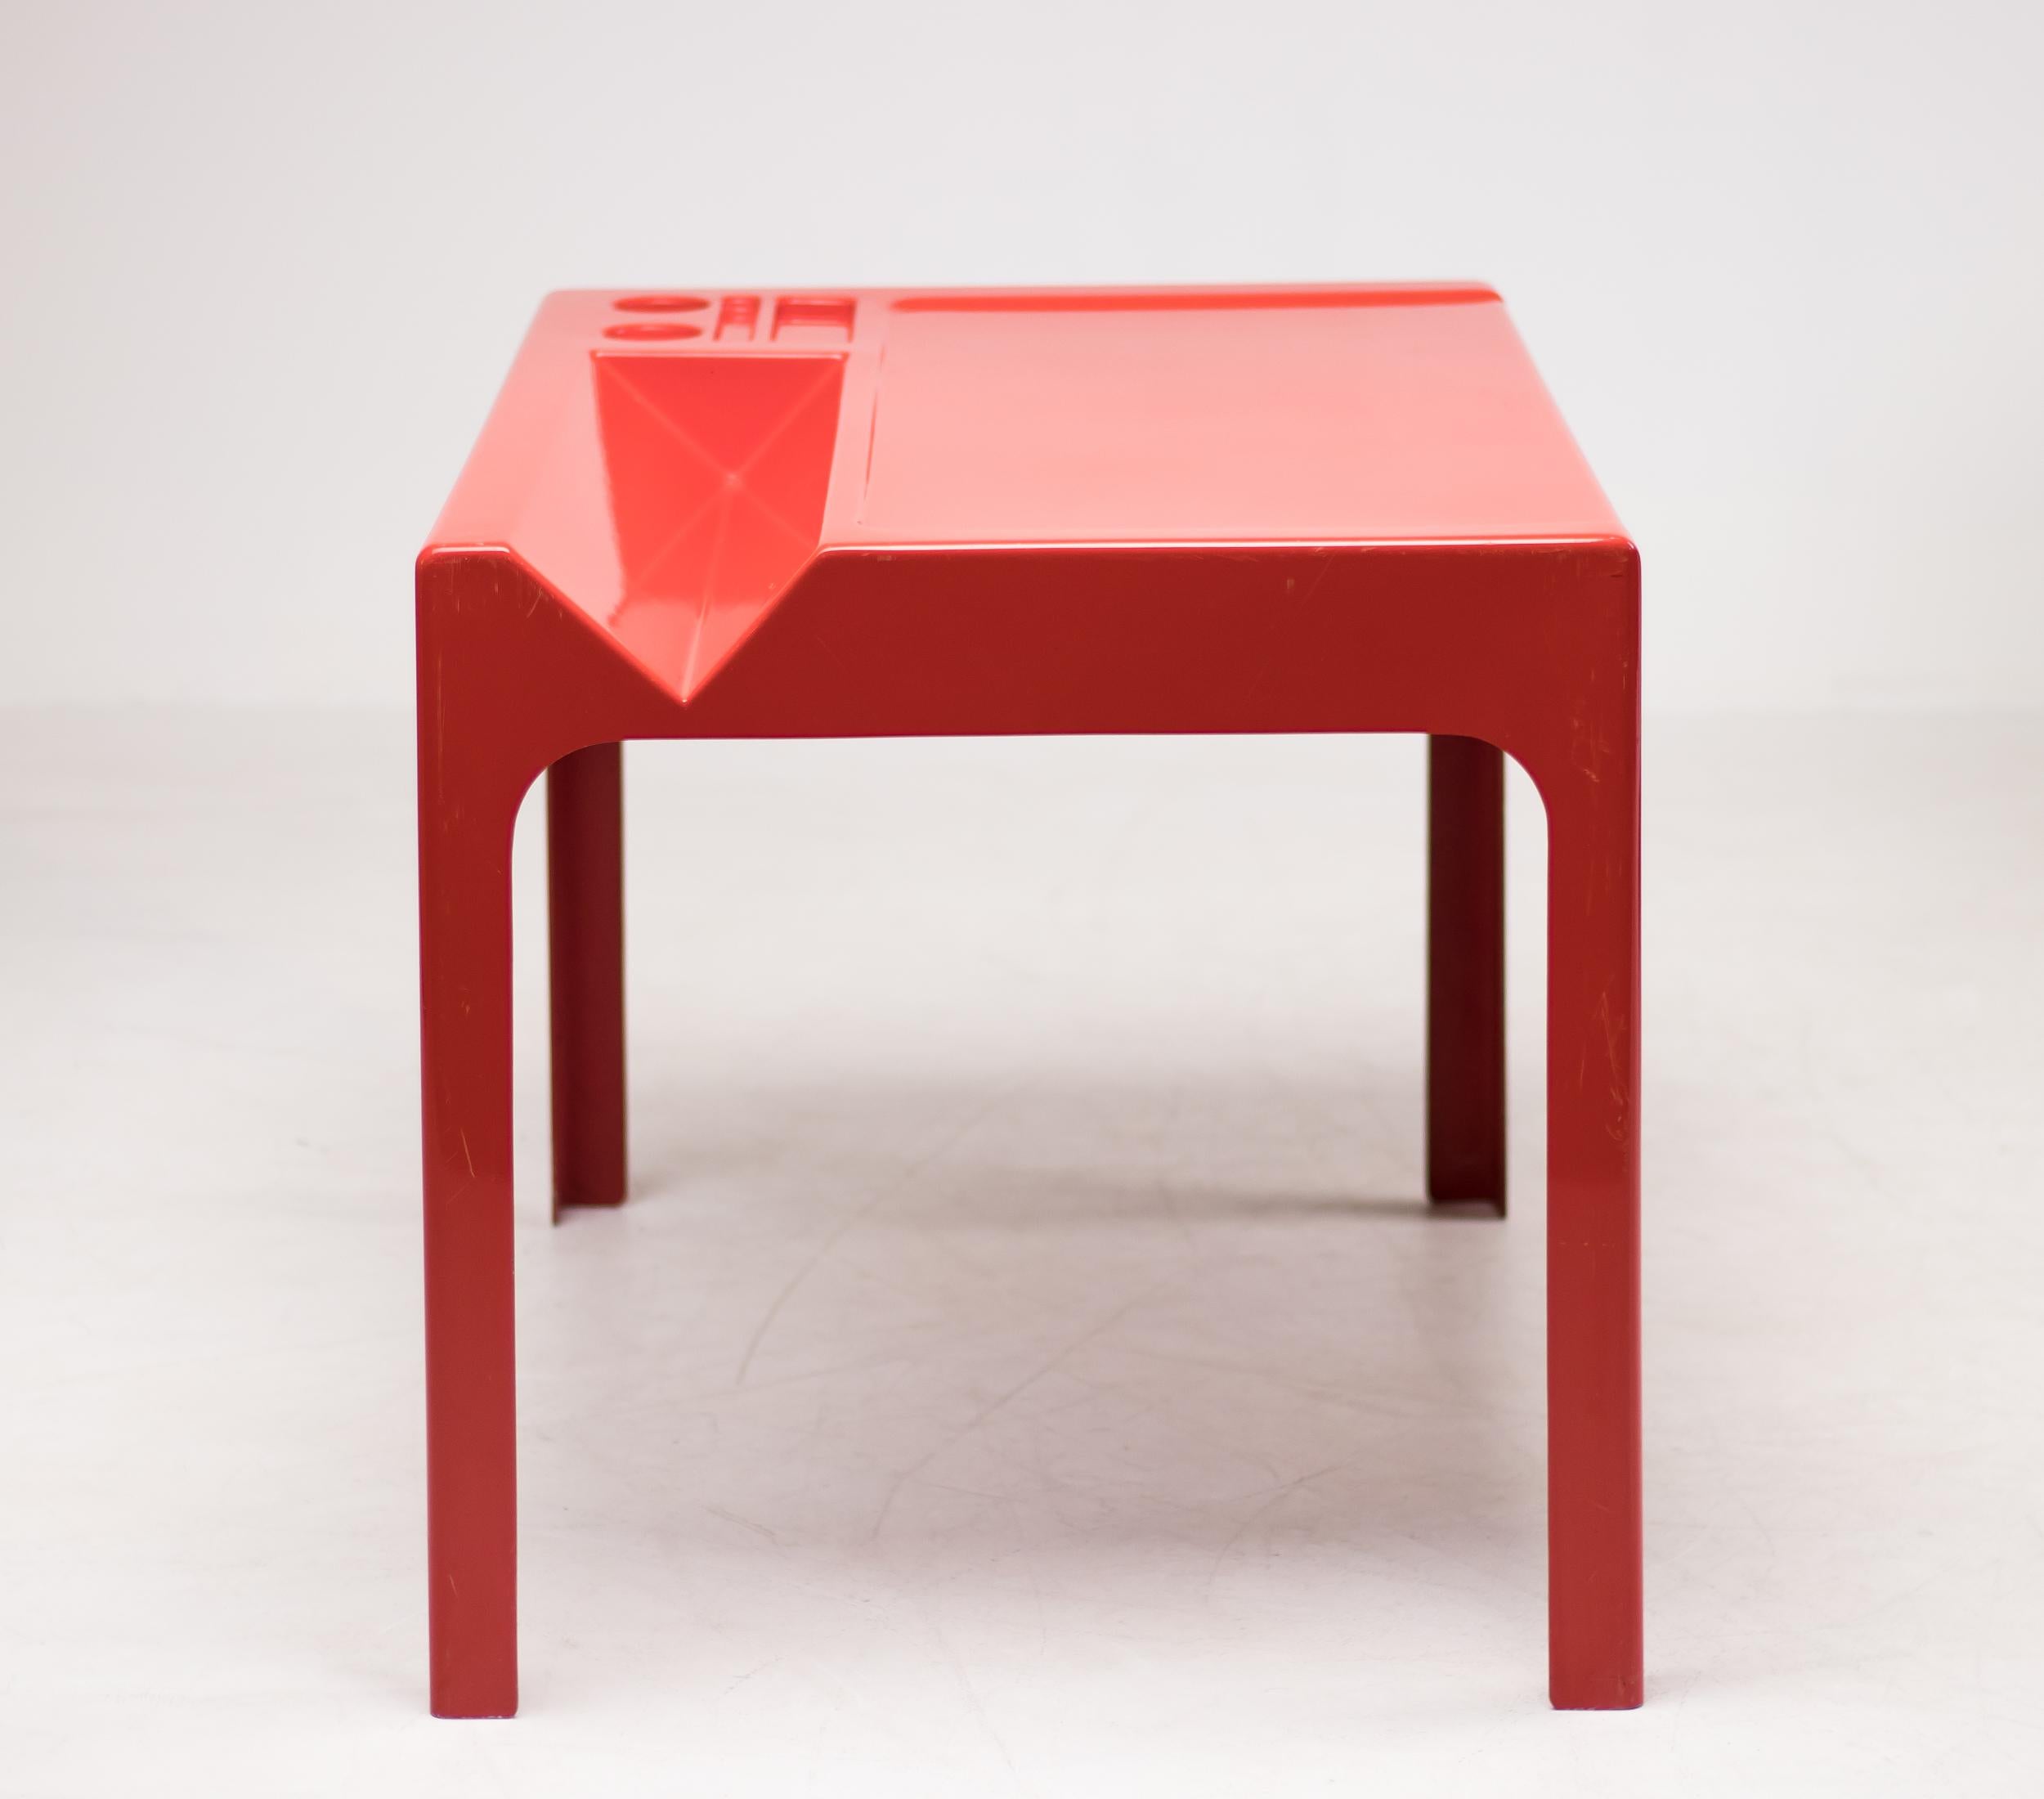 Beautiful tomato red fiberglass 'Ozoo' desk designed by Marc Berthier and manufactured by D.A.N., France.